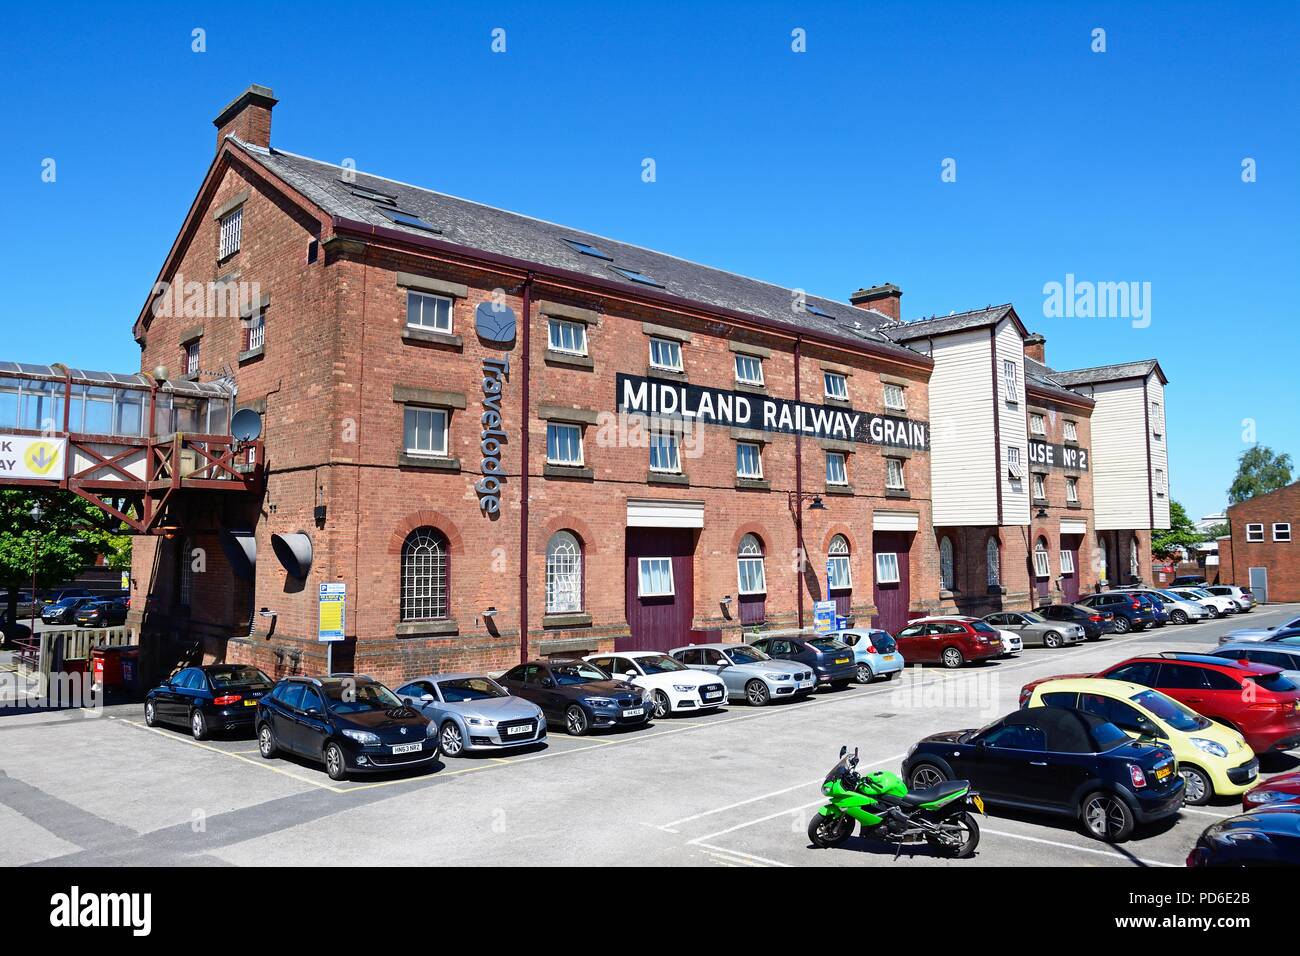 The old Midland Railway Grain Warehouse number 2 building, now a  Travelodge, Burton upon Trent, Staffordshire, England, UK, Western Europe  Stock Photo - Alamy